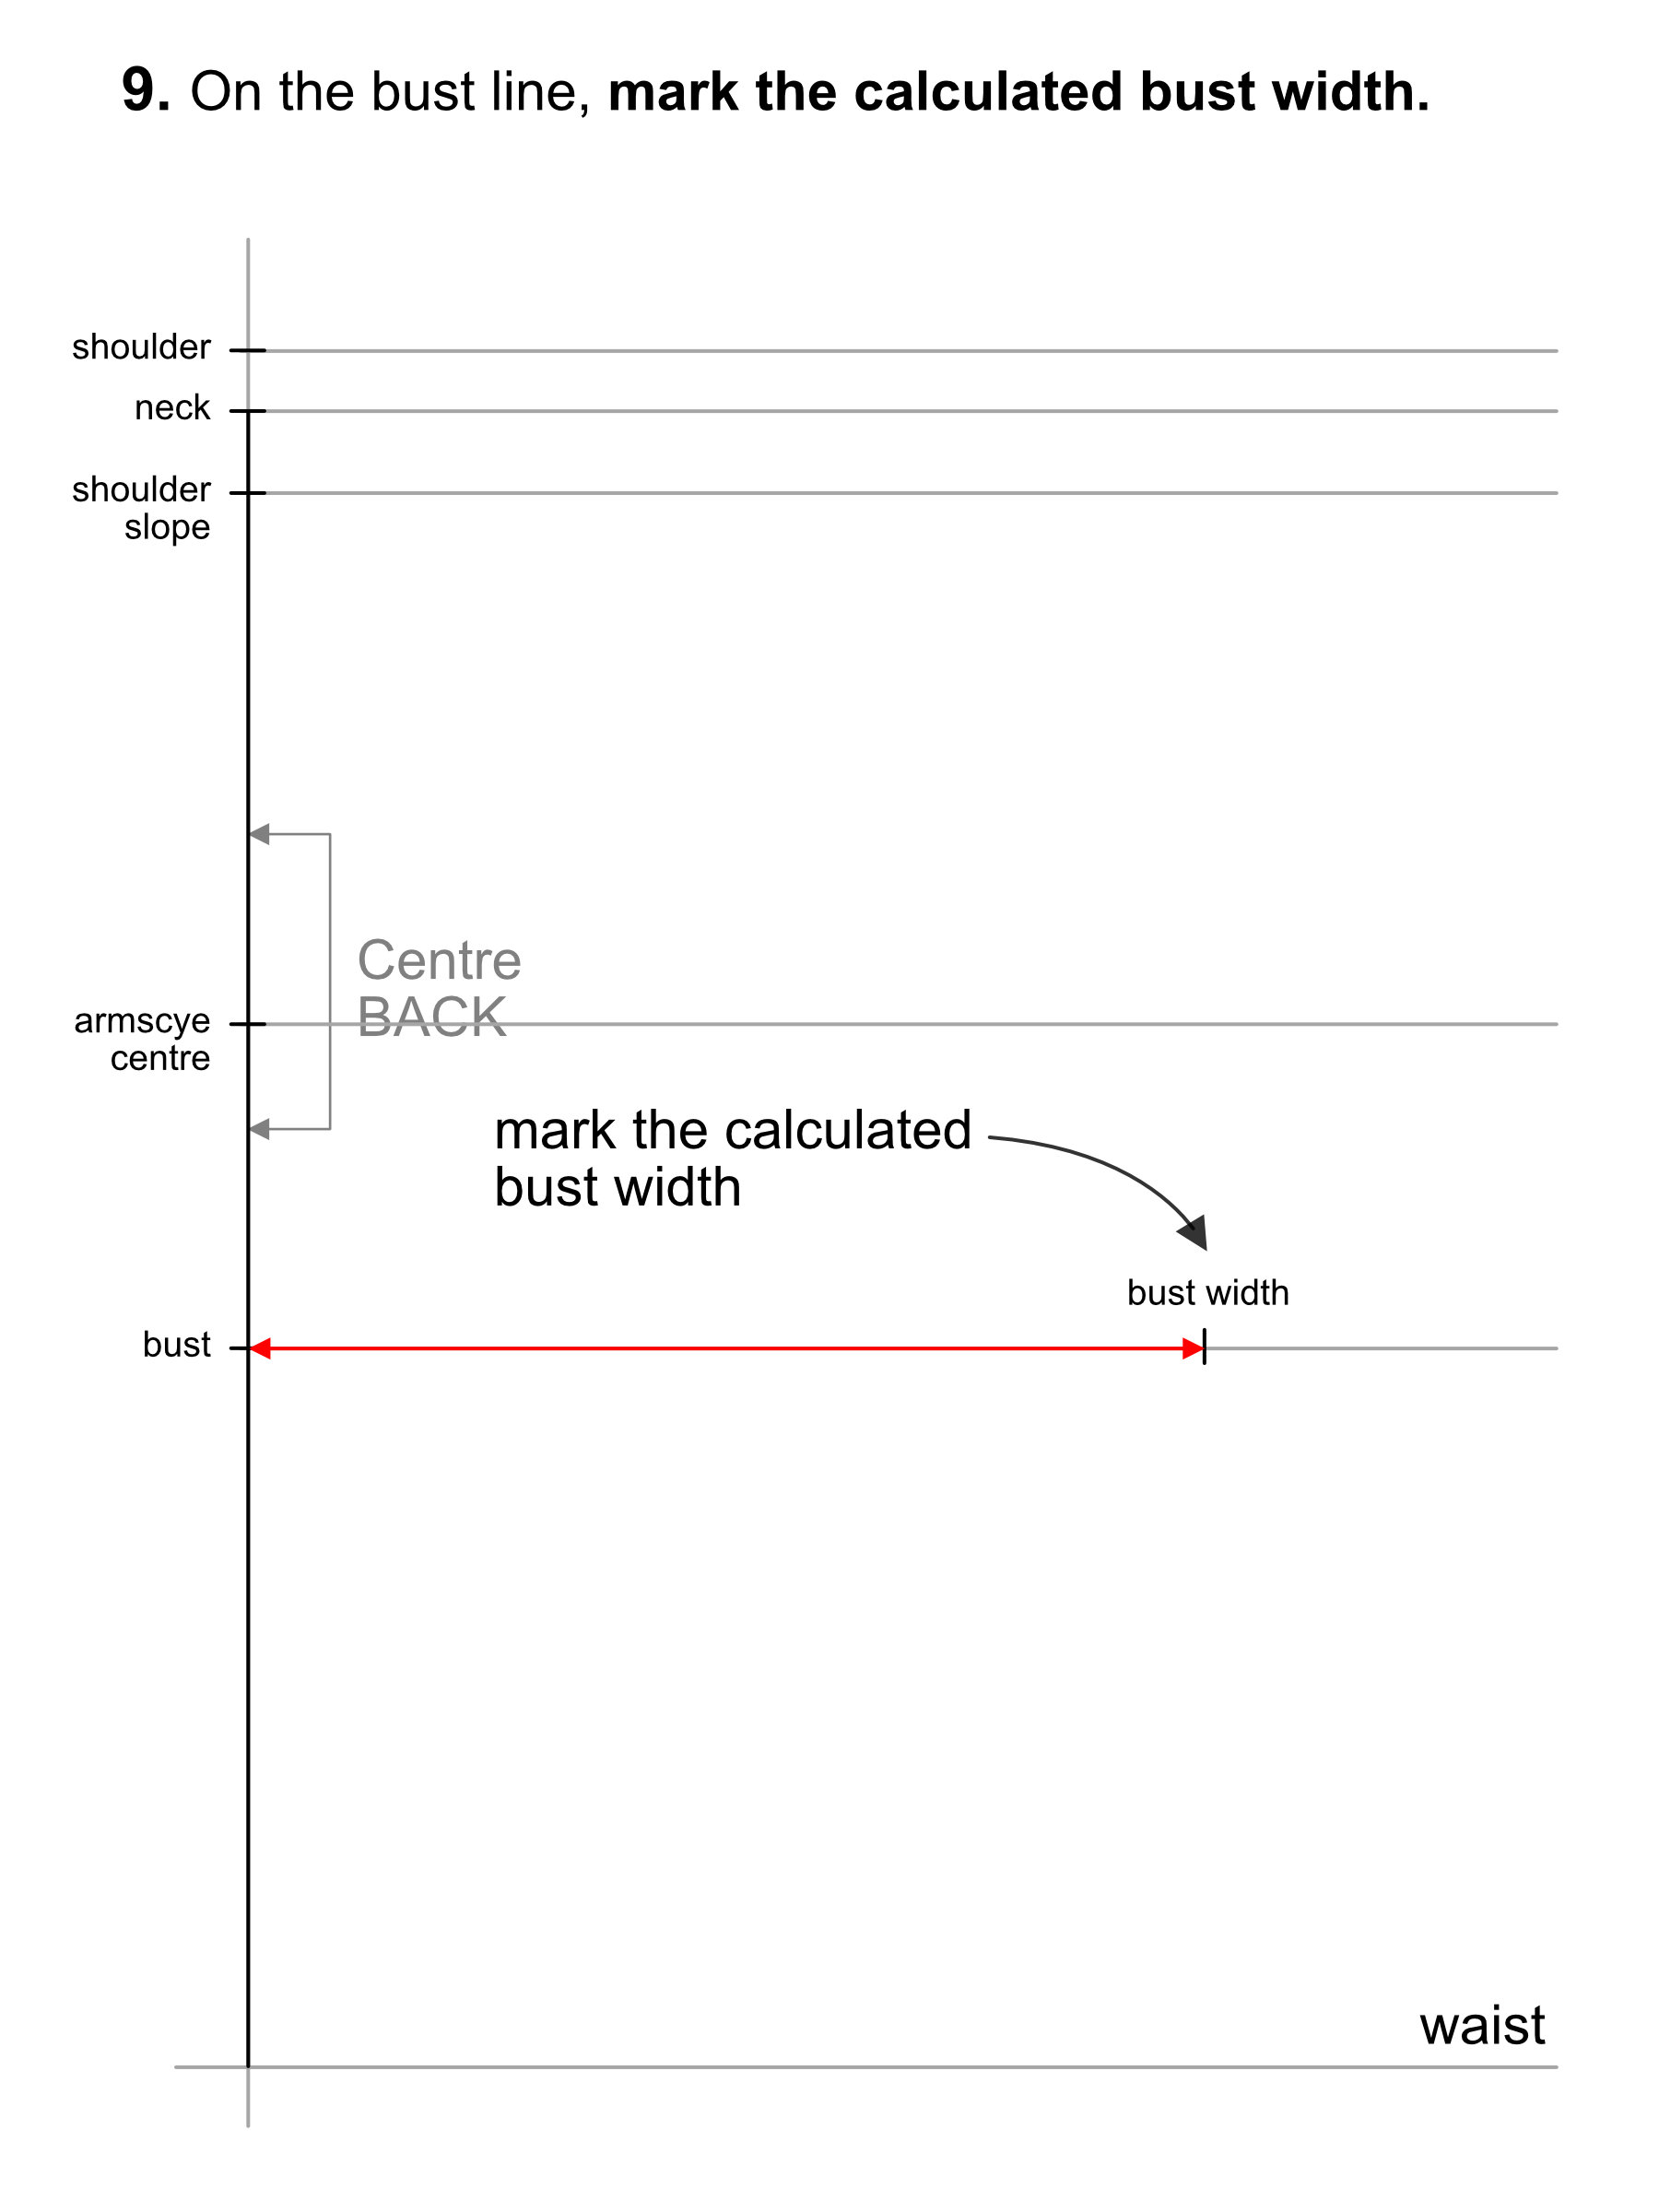 Marking the bust with ease width on a horizontal line.